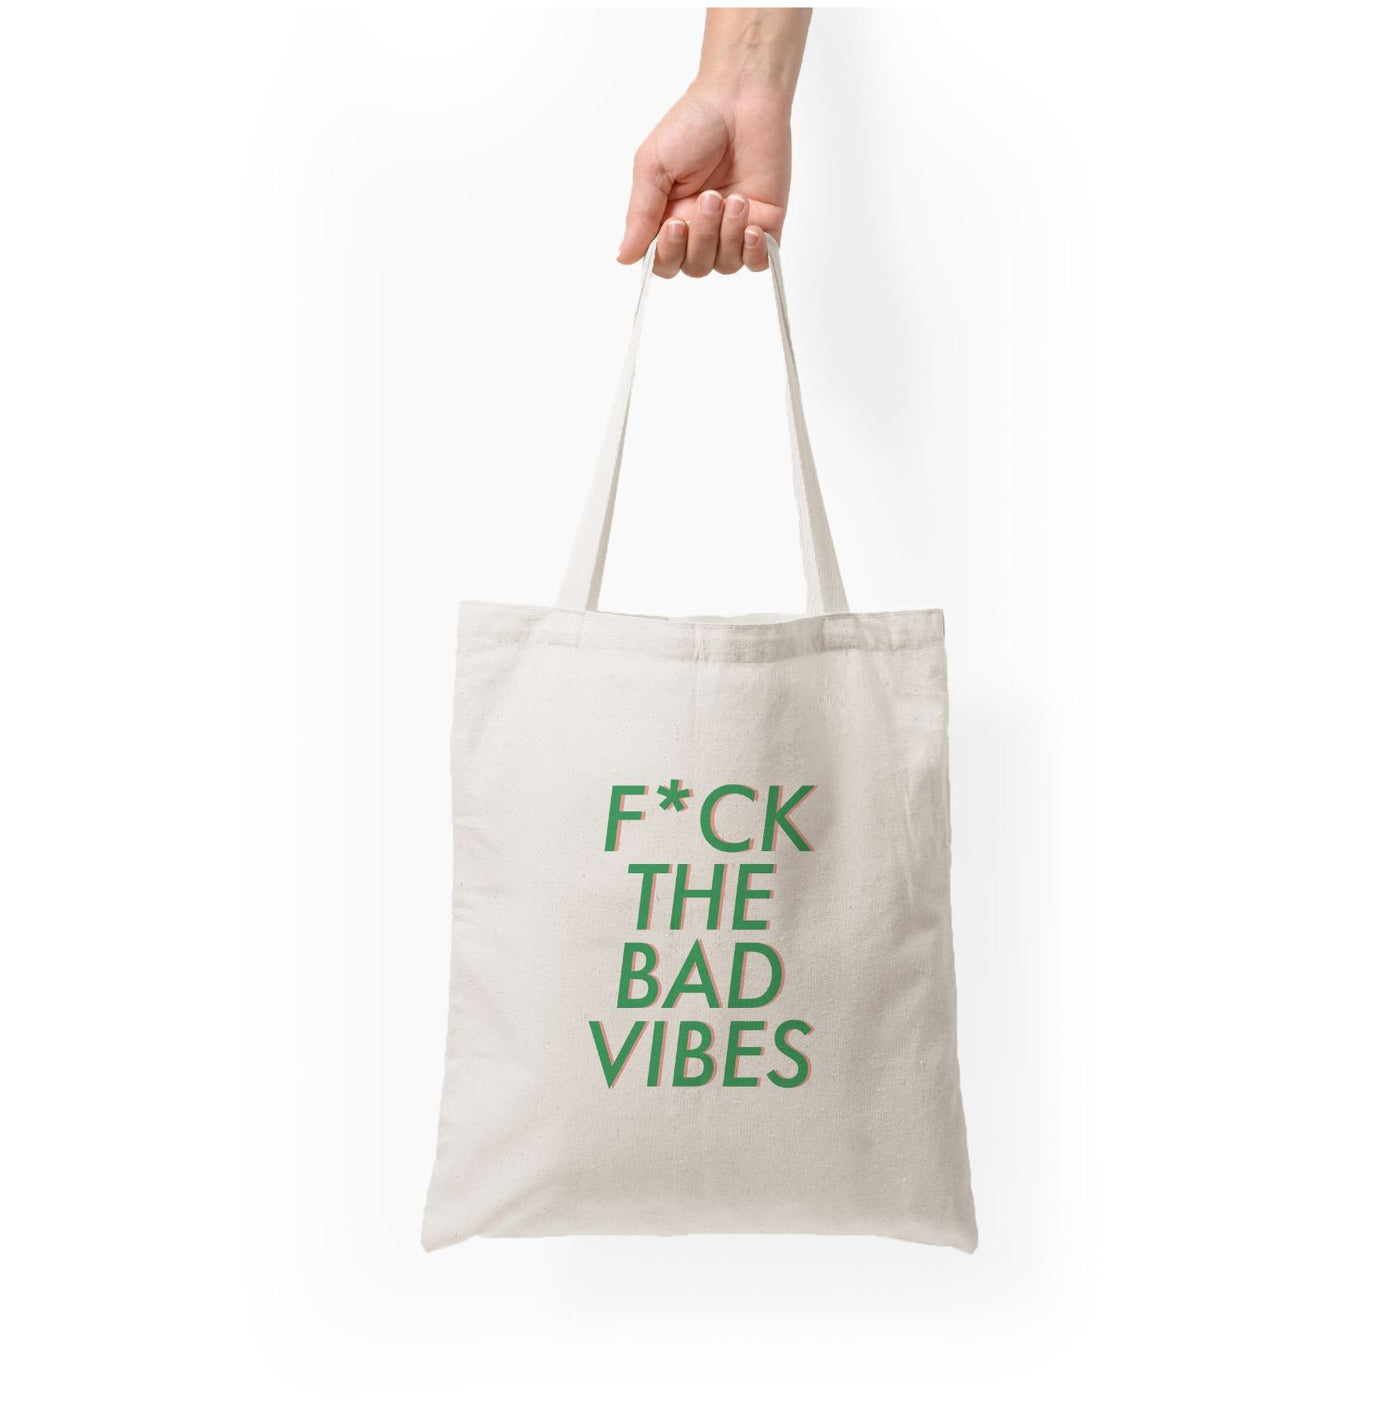 The Bad Vibes - Sassy Quotes Tote Bag